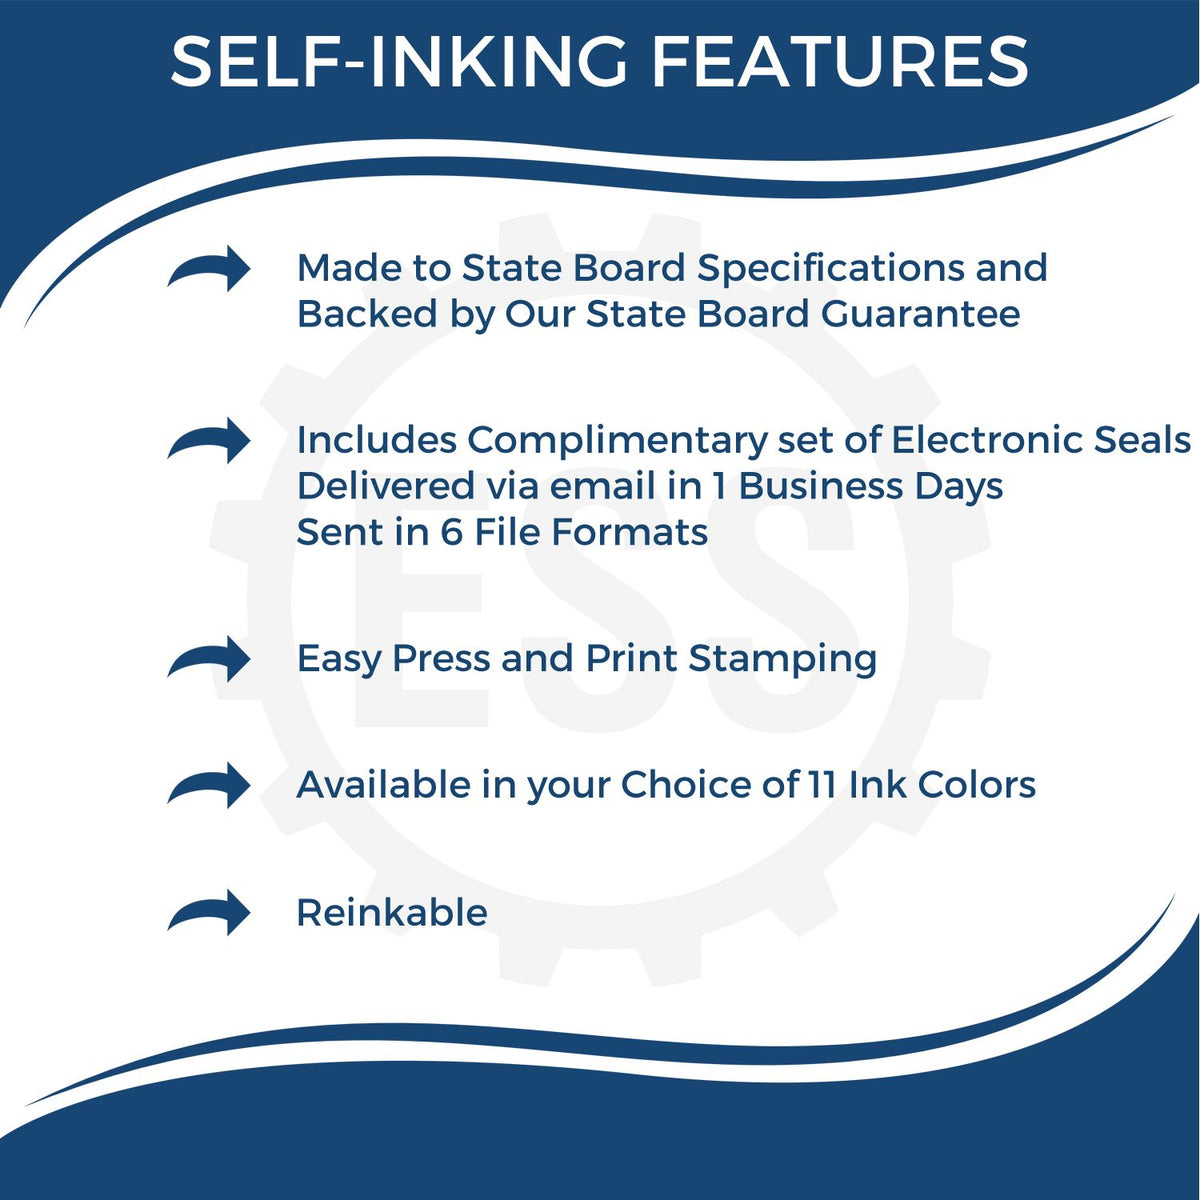 A picture of an infographic highlighting the selling points for the Self-Inking Rectangular Pennsylvania Notary Stamp